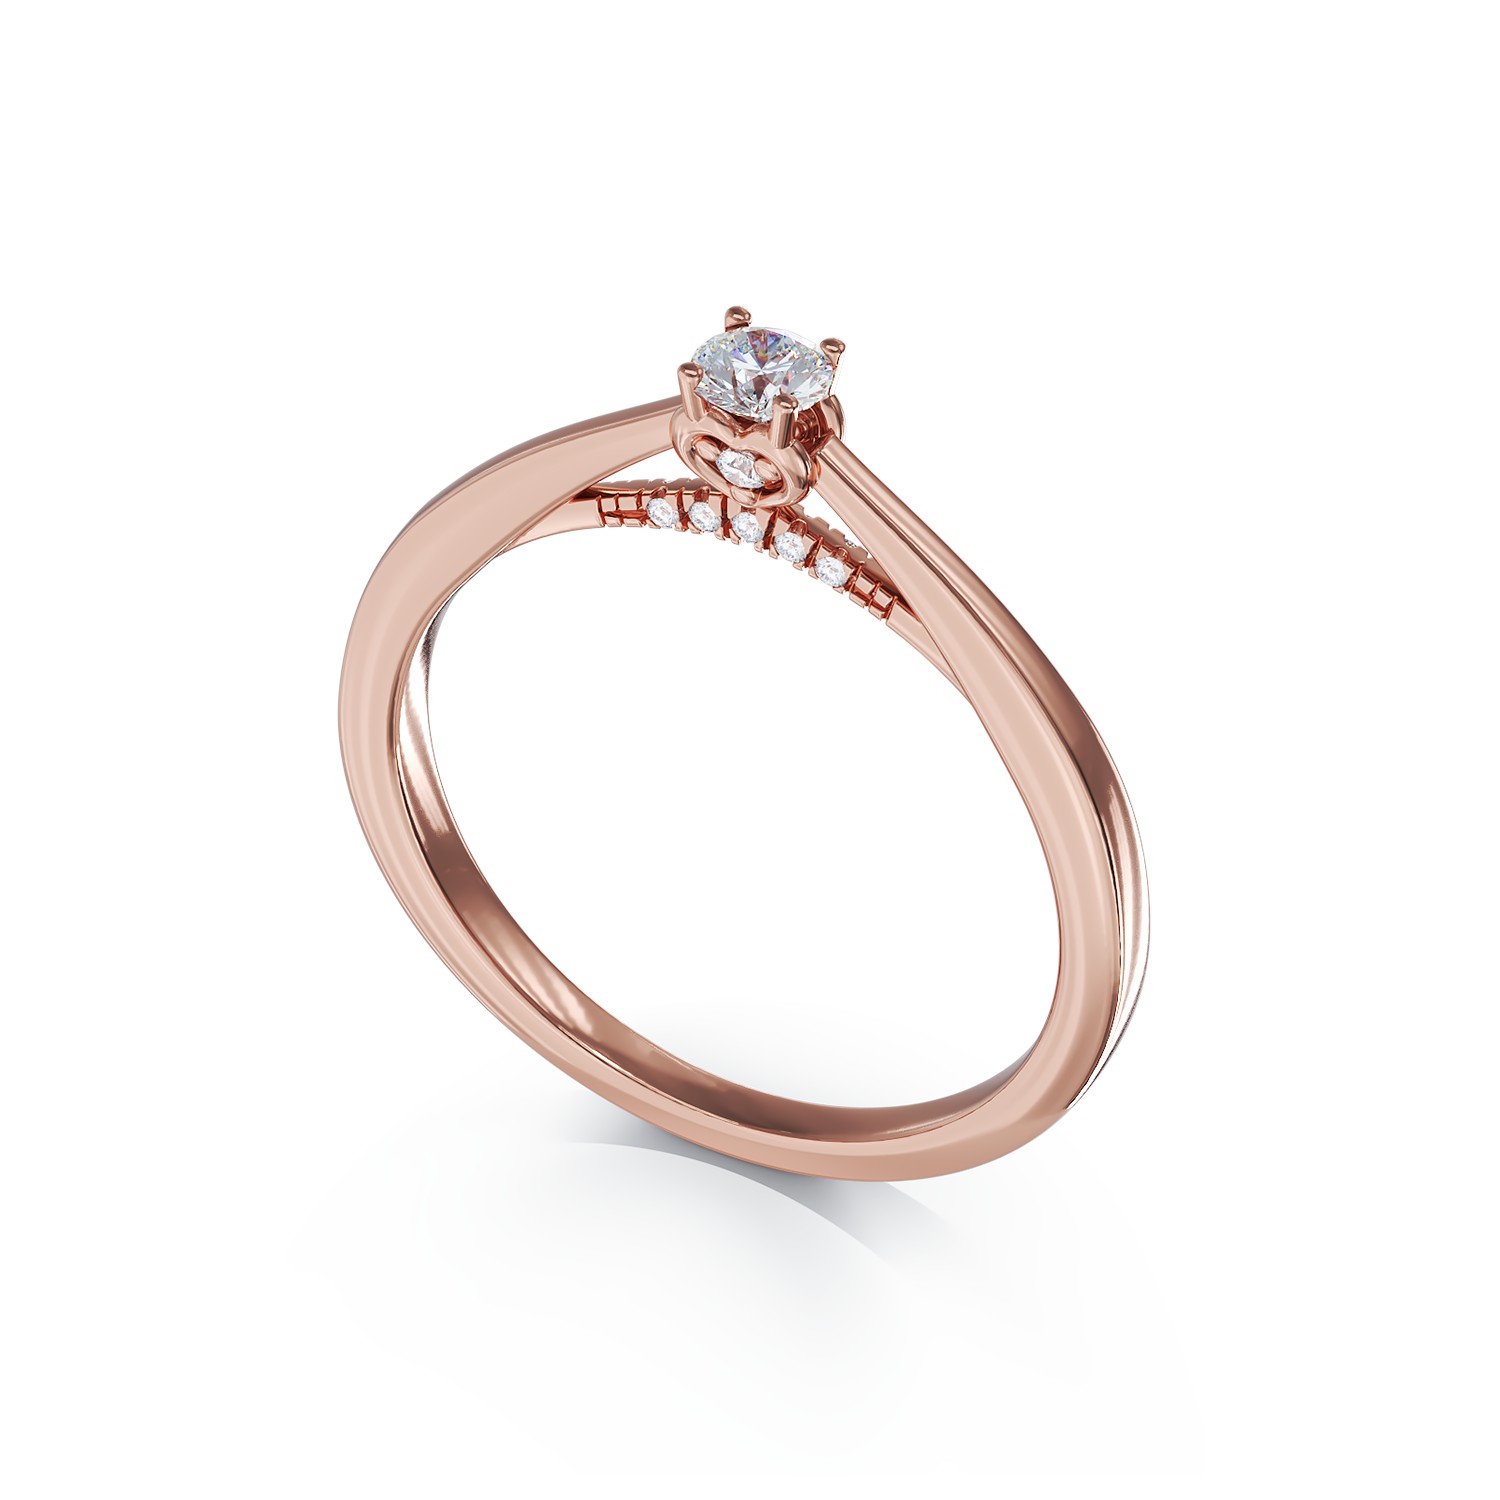 Rose gold engagement ring with 0.17ct diamonds